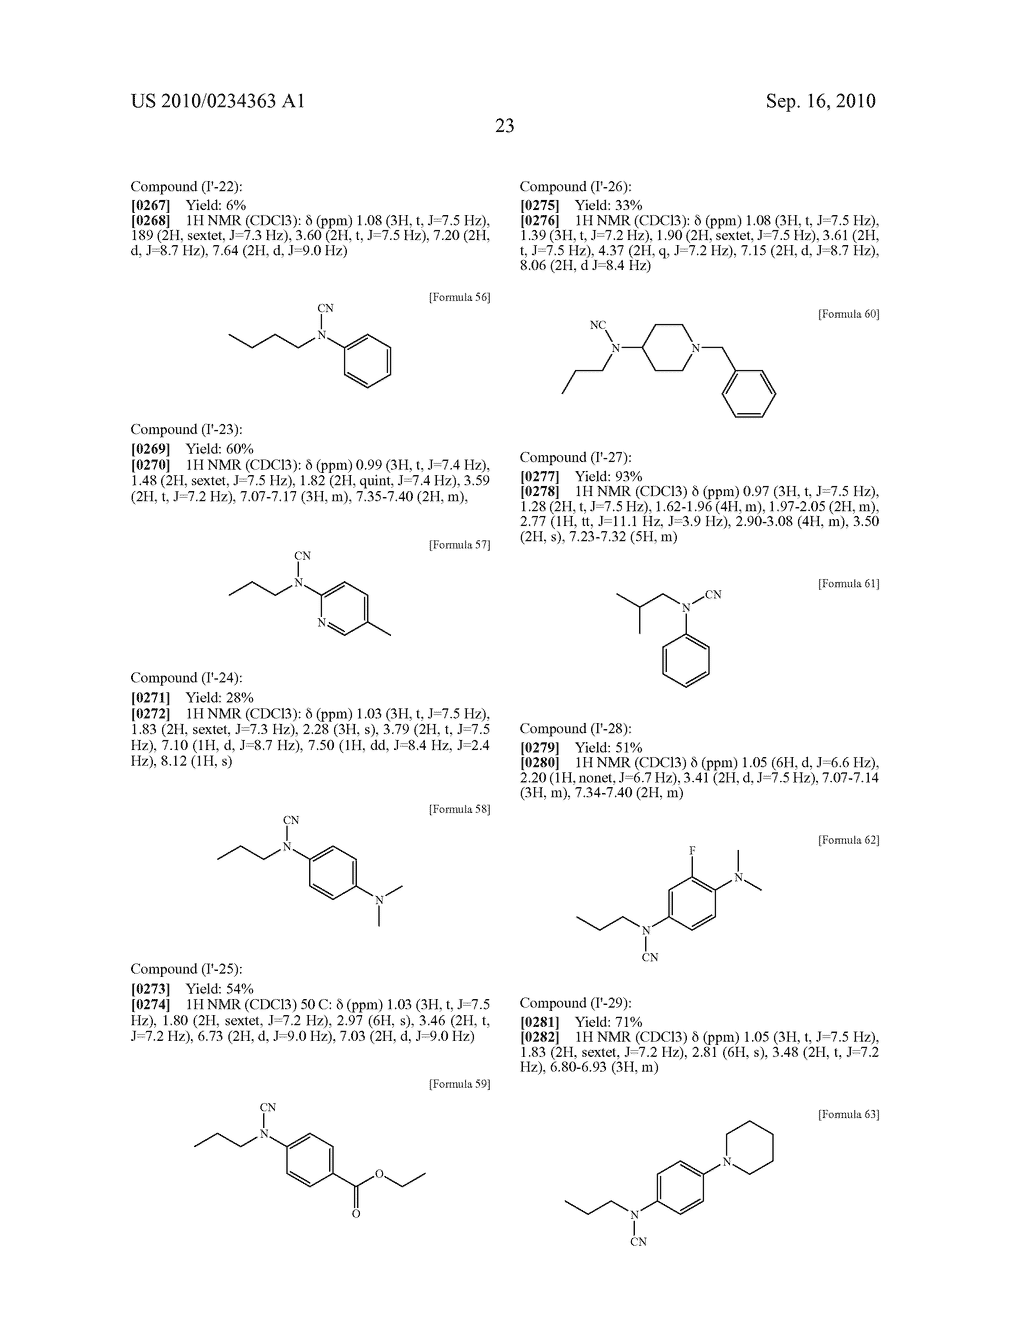 HETEROCYCLIC DERIVATIVE HAVING INHIBITORY ACTIVITY ON TYPE-I 11 DATA-HYDROXYSTEROID DEHYDROGENASE - diagram, schematic, and image 24